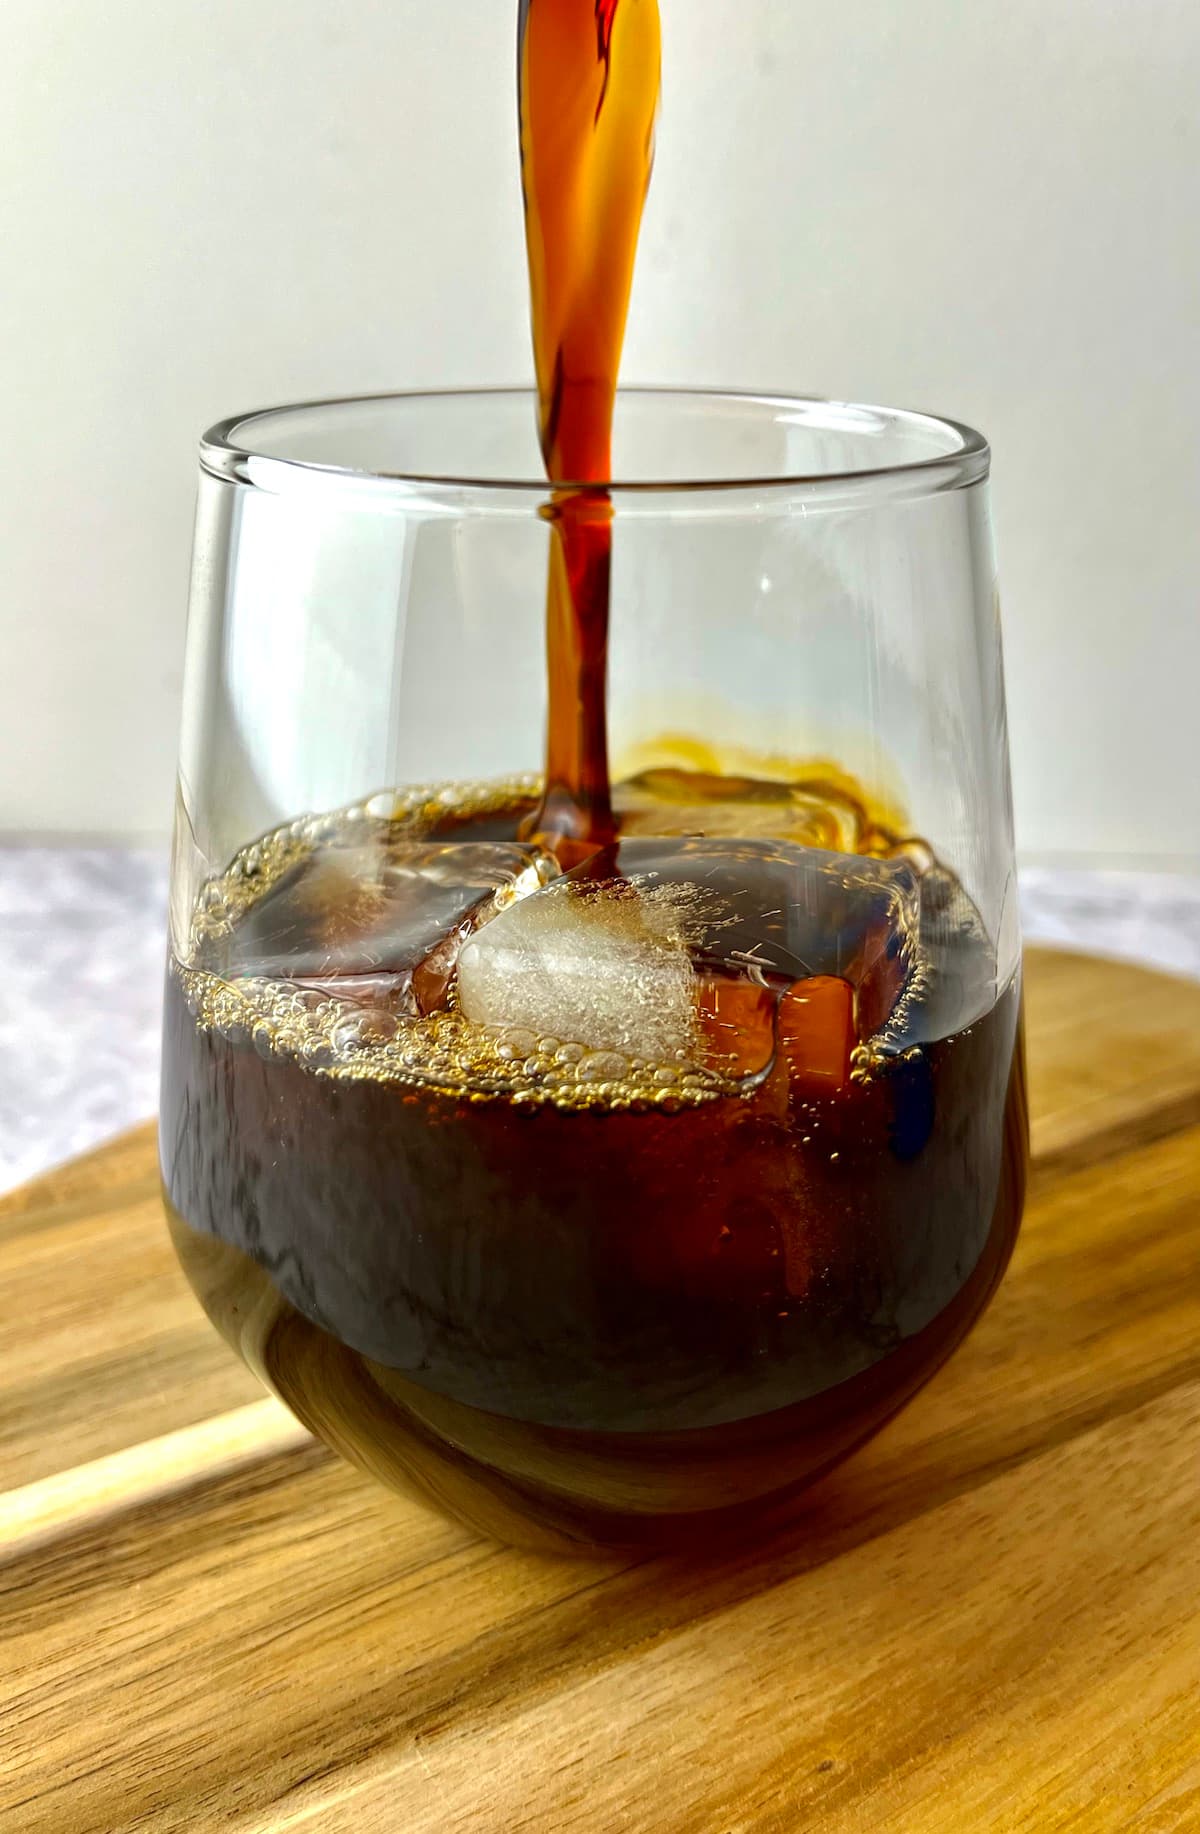 Coffee being poured over ice into a glass on a wooden board.